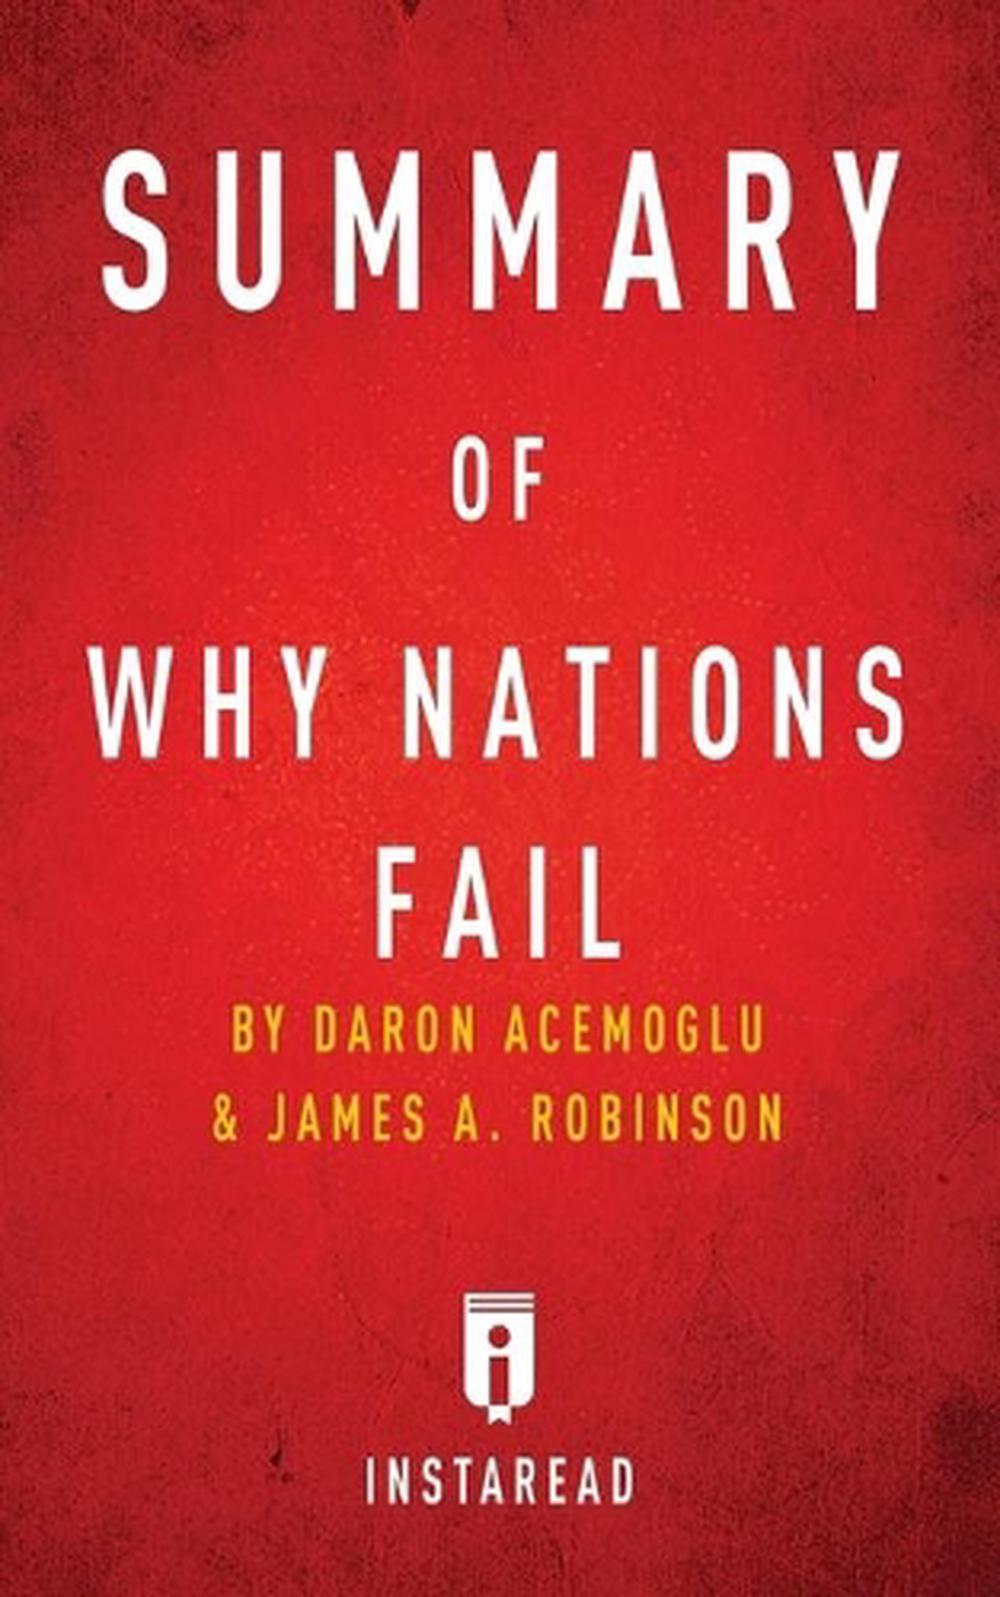 why nations fail by daron acemoglu and james robinson